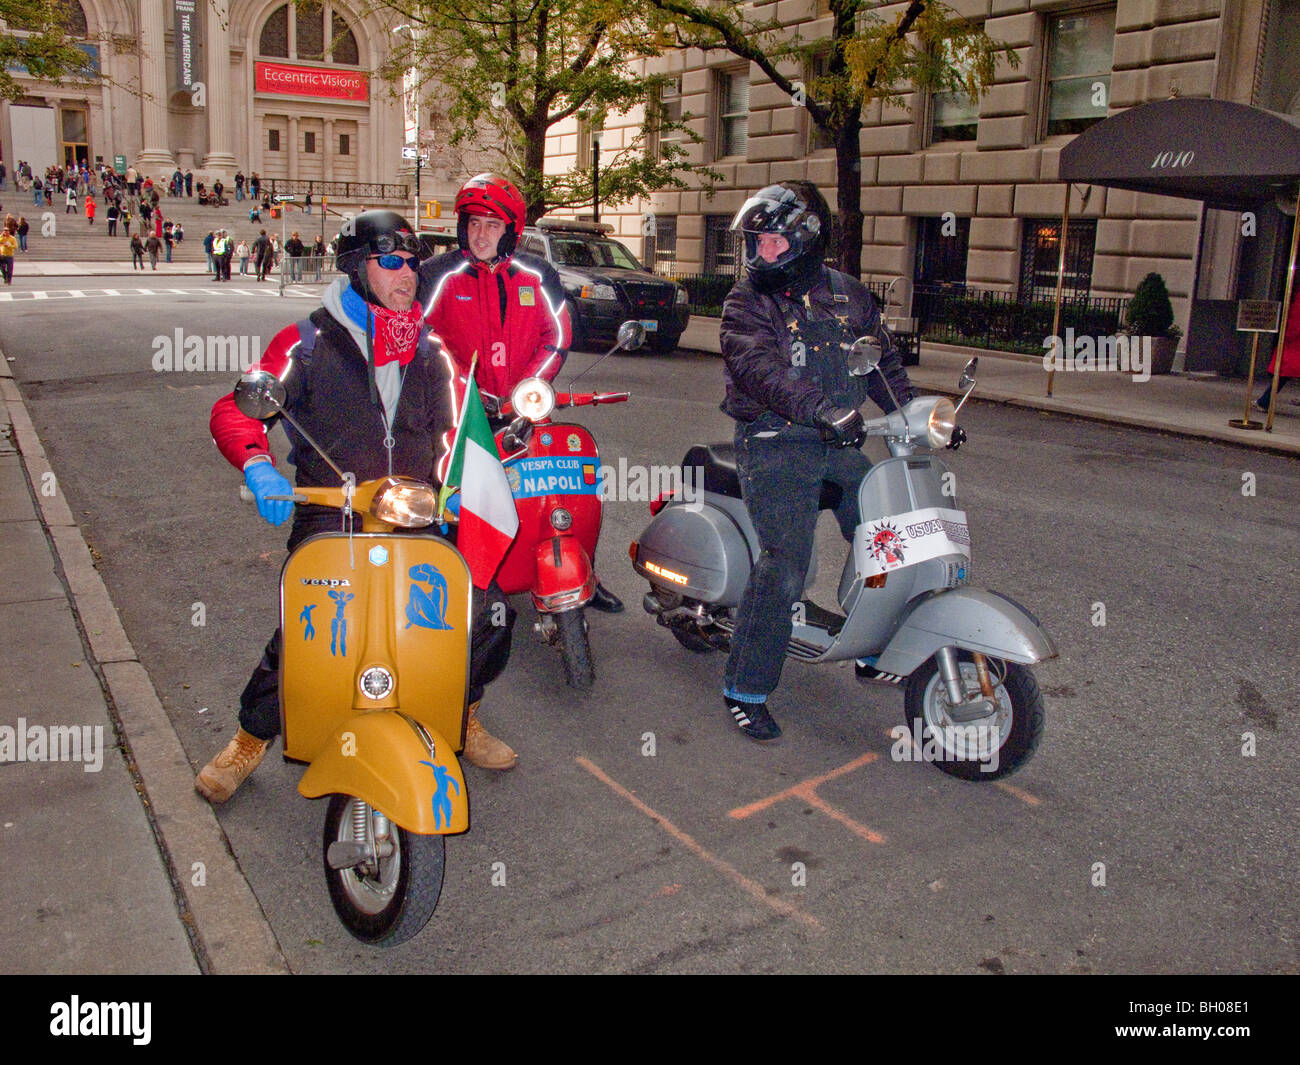 Members of a motor scooter club gather near the Metropolitan Museum of Art (background) on Fifth Avenue, New York City. Stock Photo